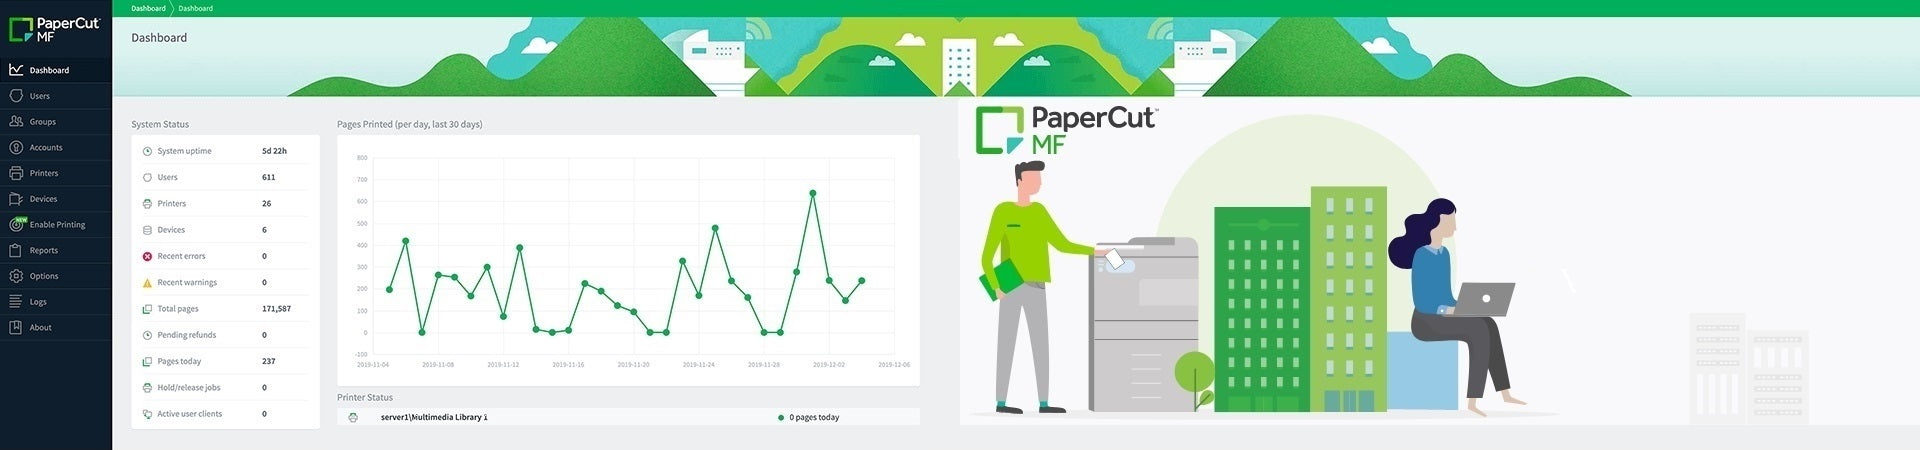 PaperCut MF powerful print management for printers and MFDs